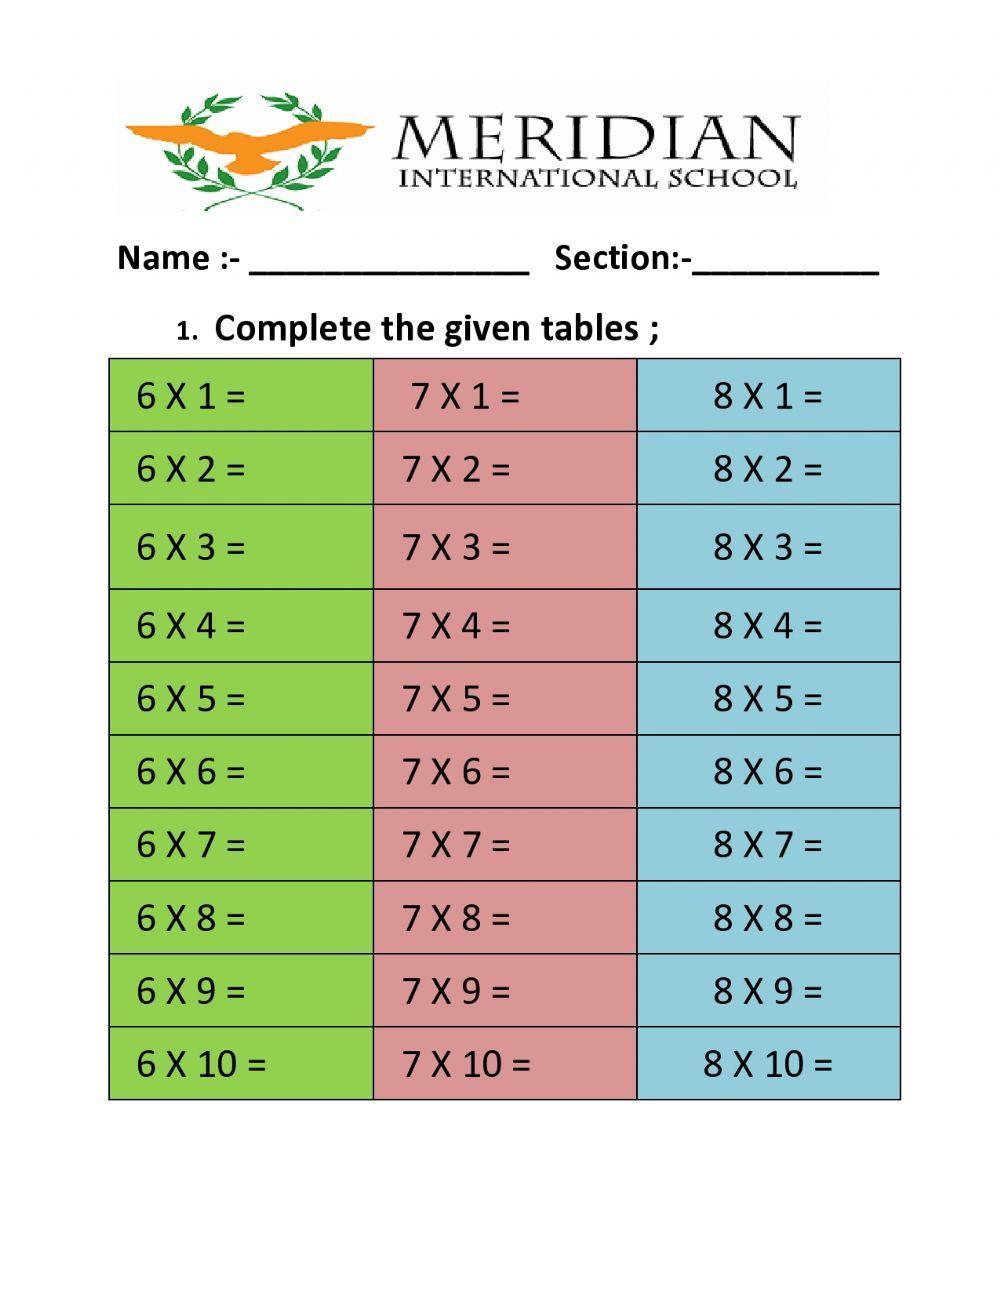 Times table